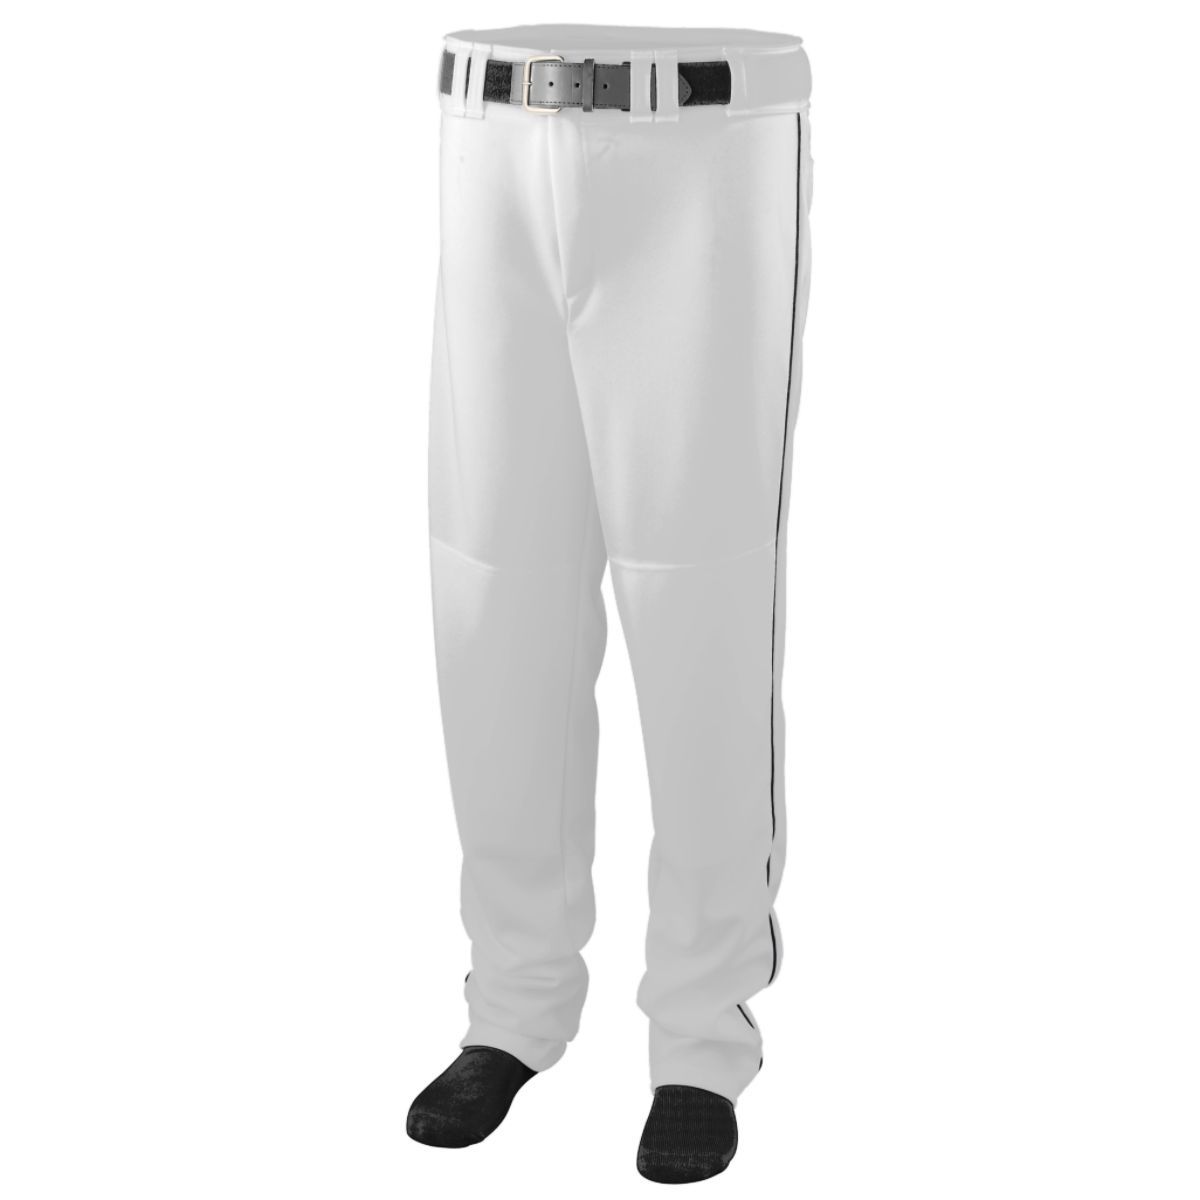 Augusta Sportswear Series Baseball/Softball Pant With Piping in White/Black  -Part of the Adult, Adult-Pants, Pants, Augusta-Products, Baseball, All-Sports, All-Sports-1 product lines at KanaleyCreations.com